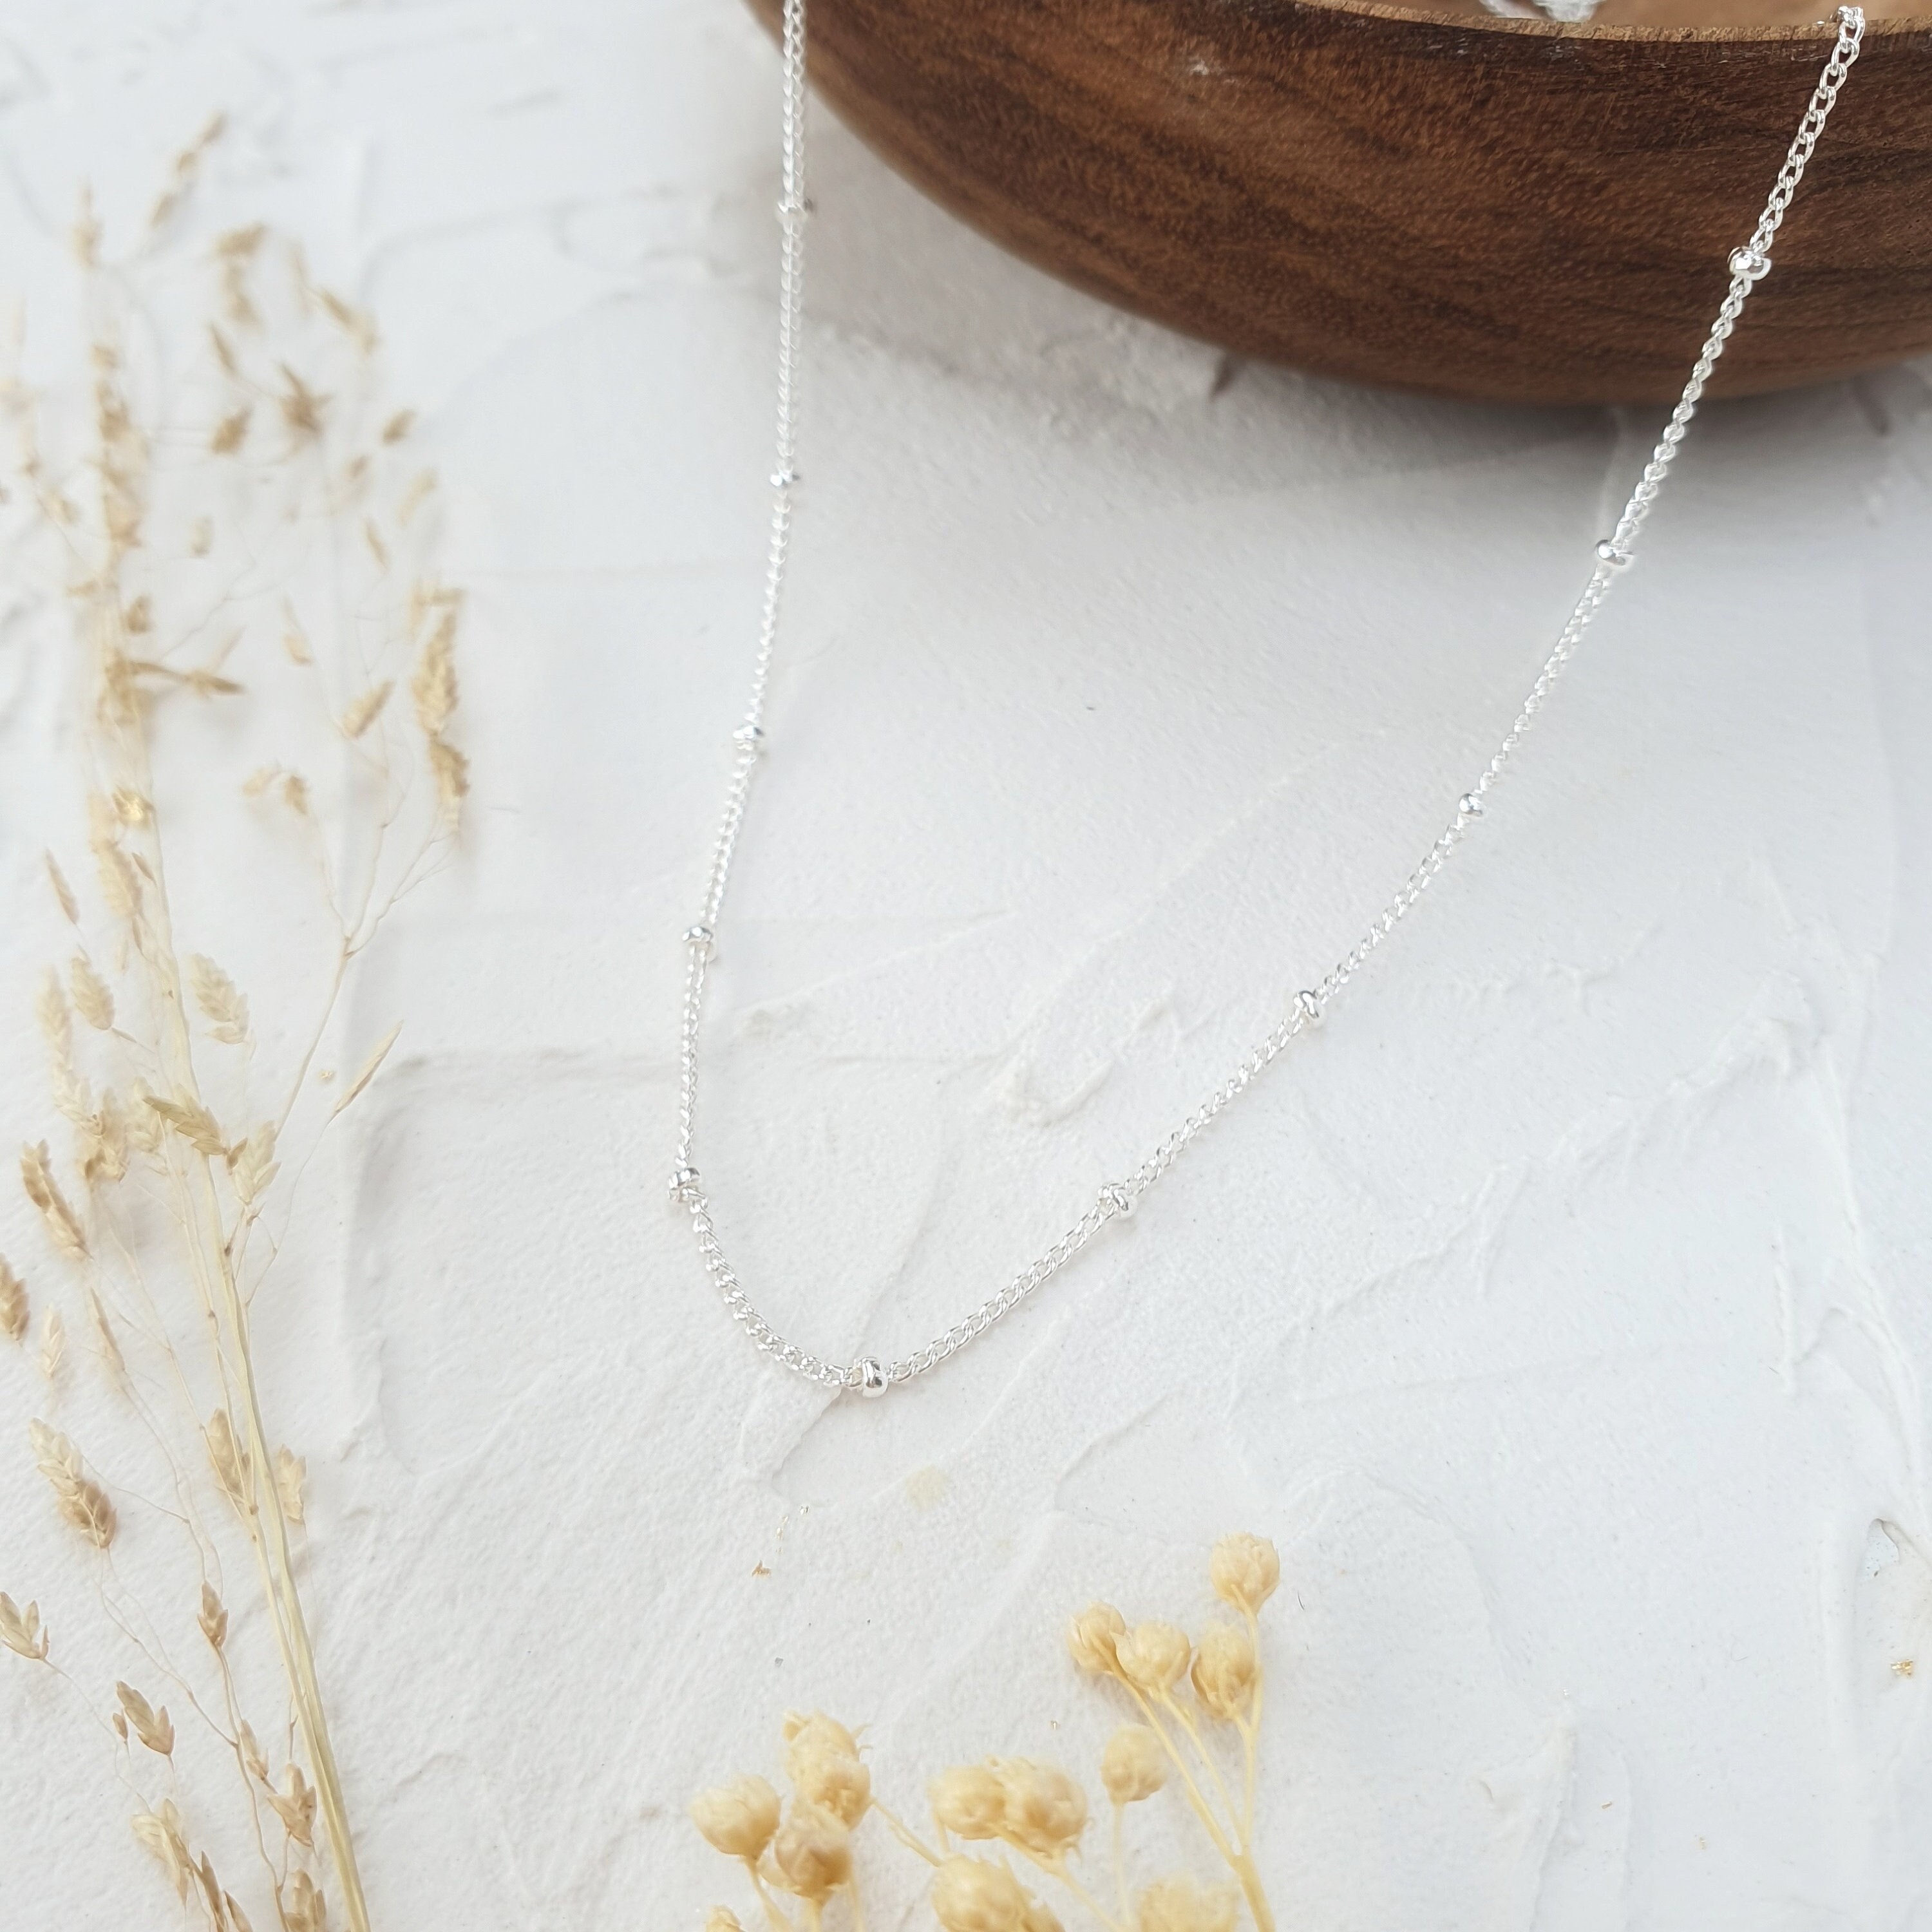 Silver Bead Chain, Layering Necklace, Delicate Necklace